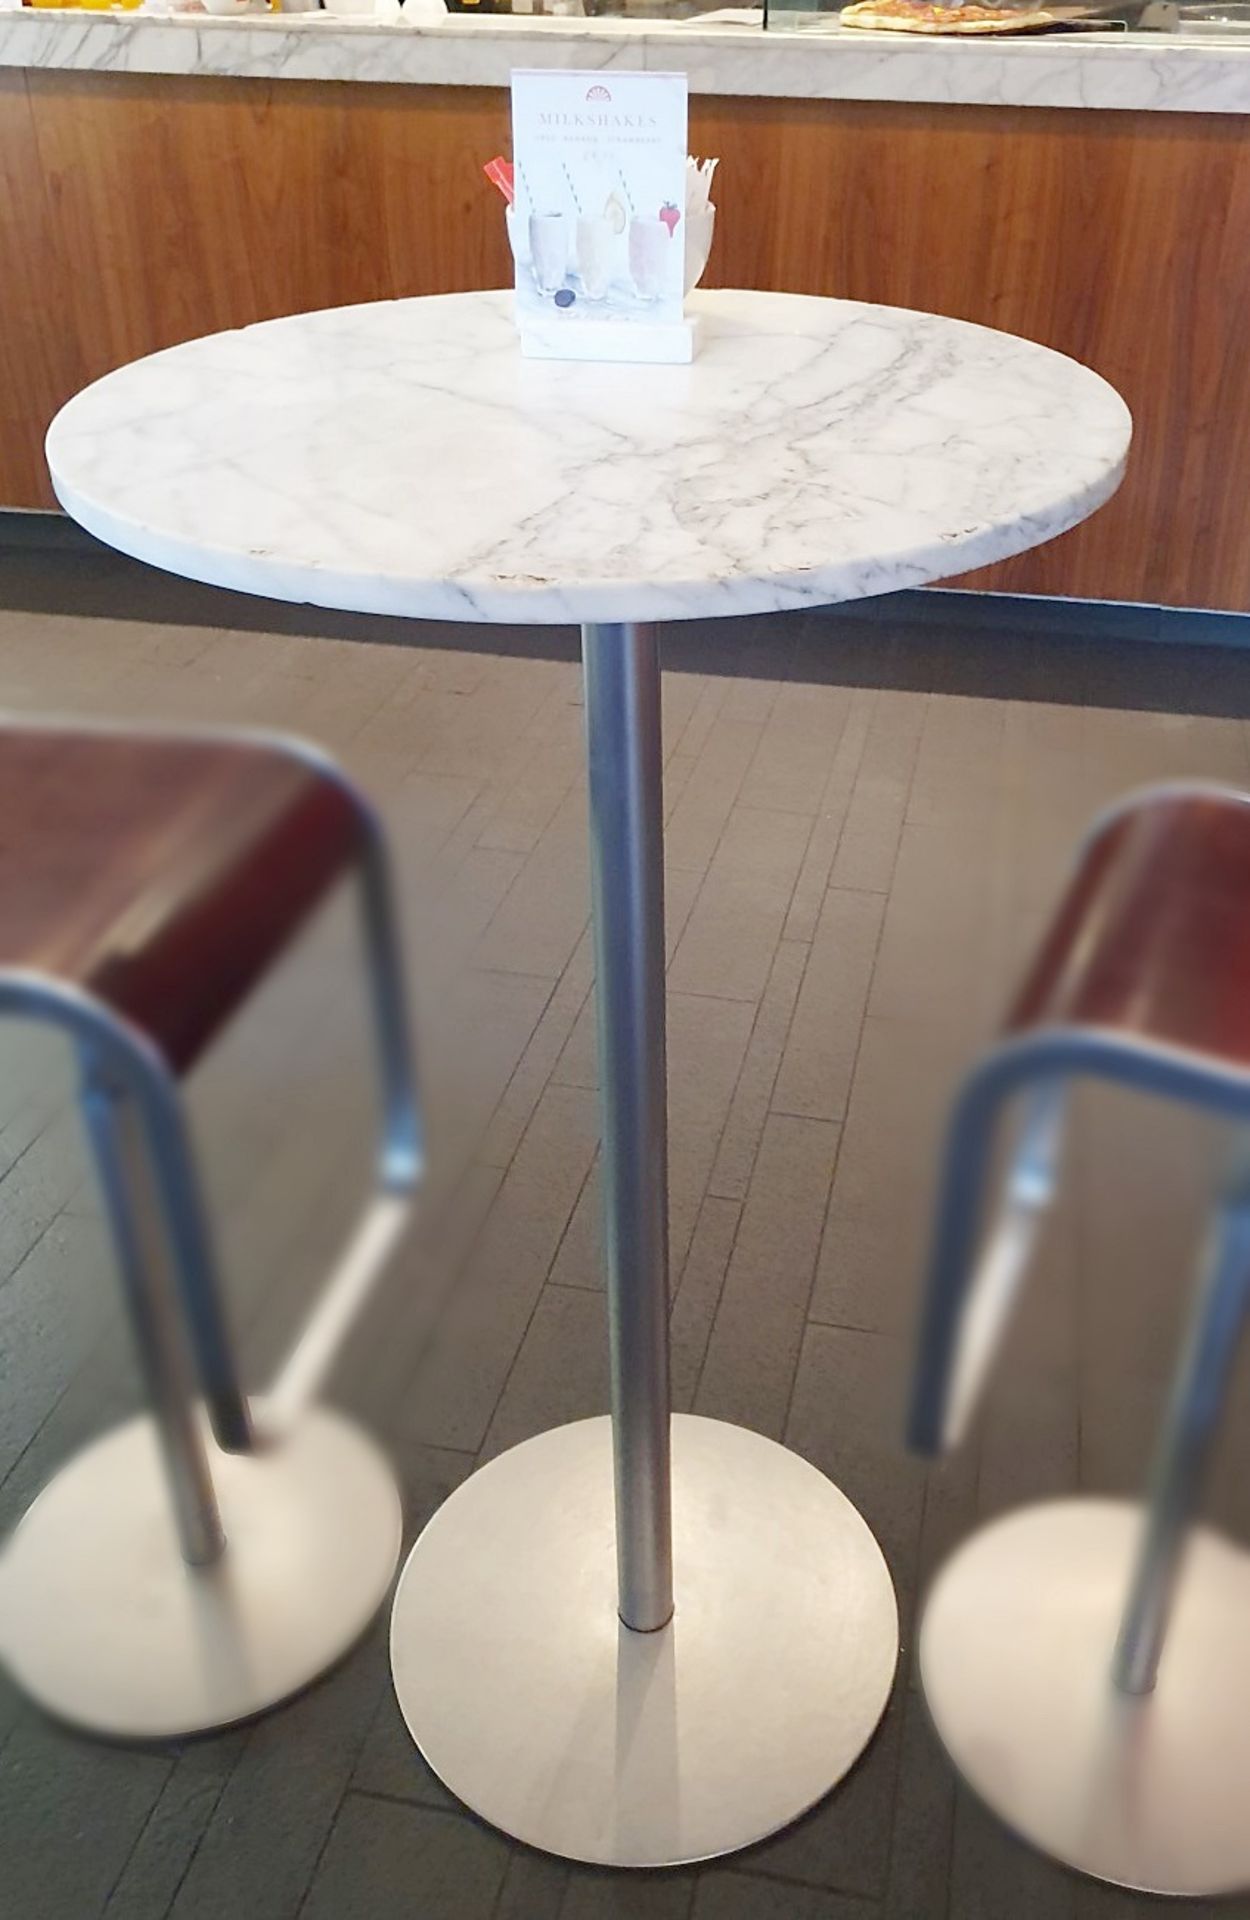 1 x Tall Round Marble/Granite Cocktail Bar Table - Dimensions: Diameter 60cm x Height 111cm - Ref: - Image 4 of 6